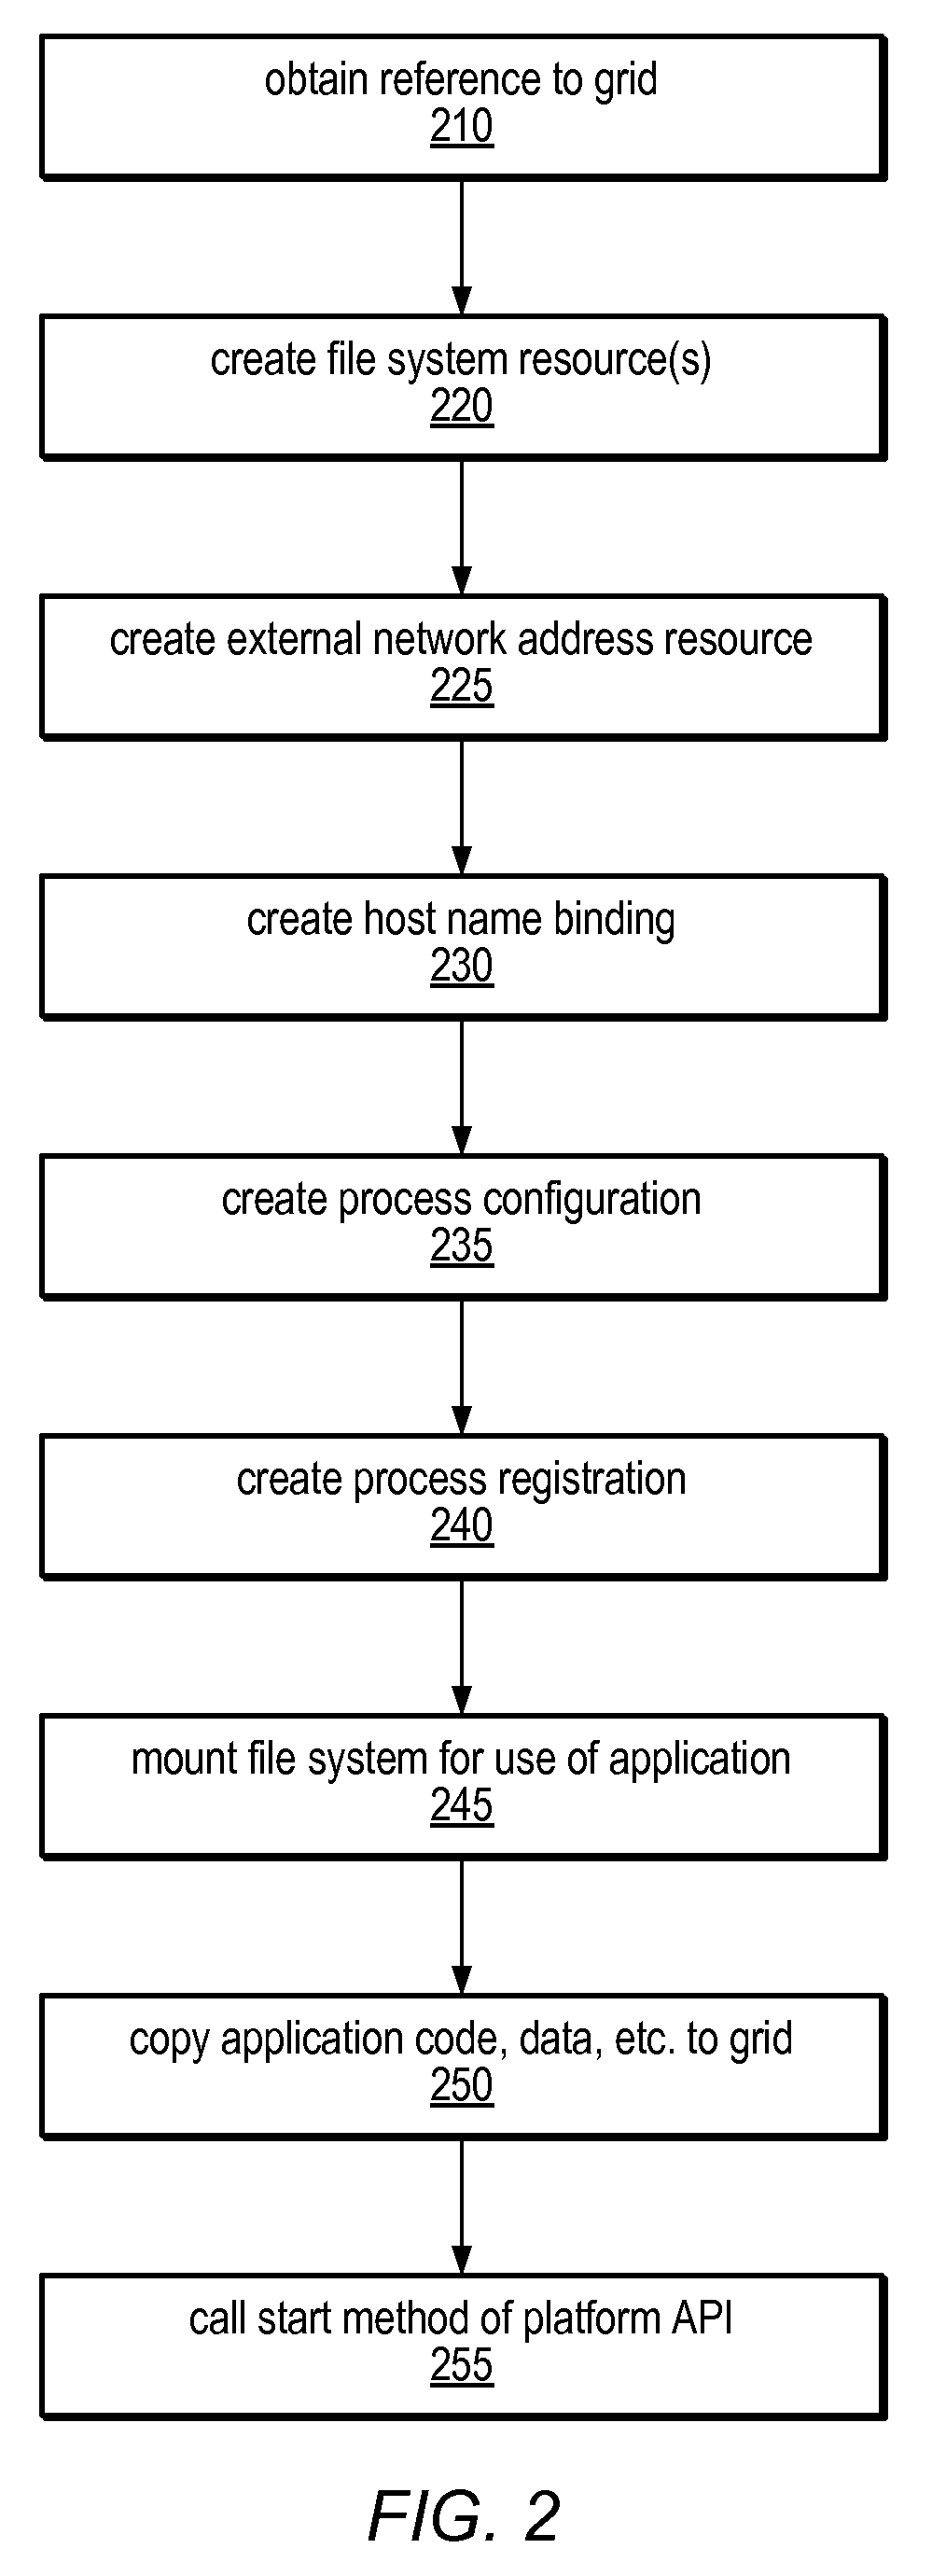 System and method for programmatic management of distributed computing resources